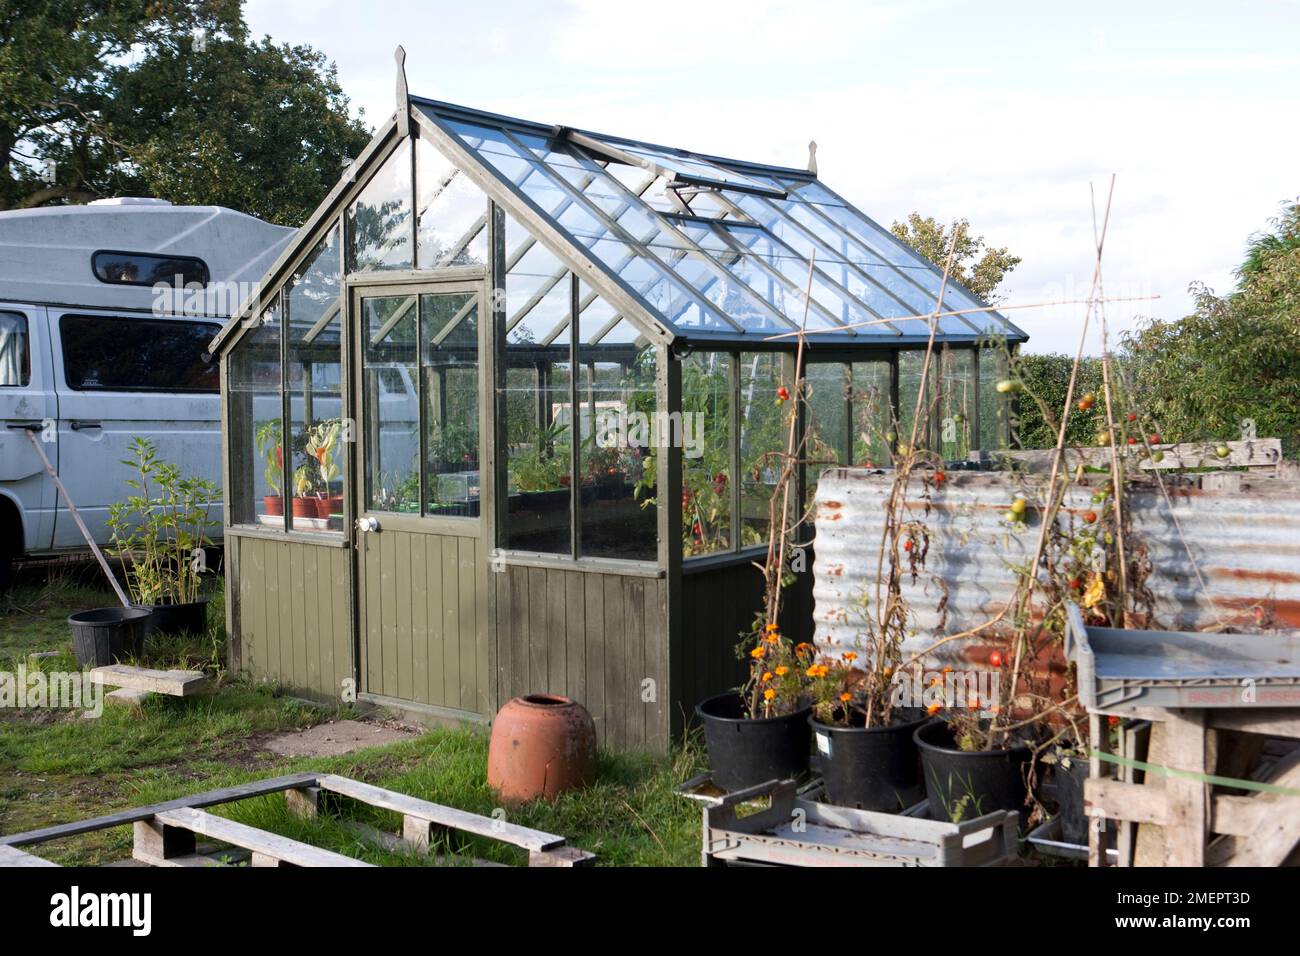 Greenhouse, end of season tomatoes in pots, and campervan in background Stock Photo